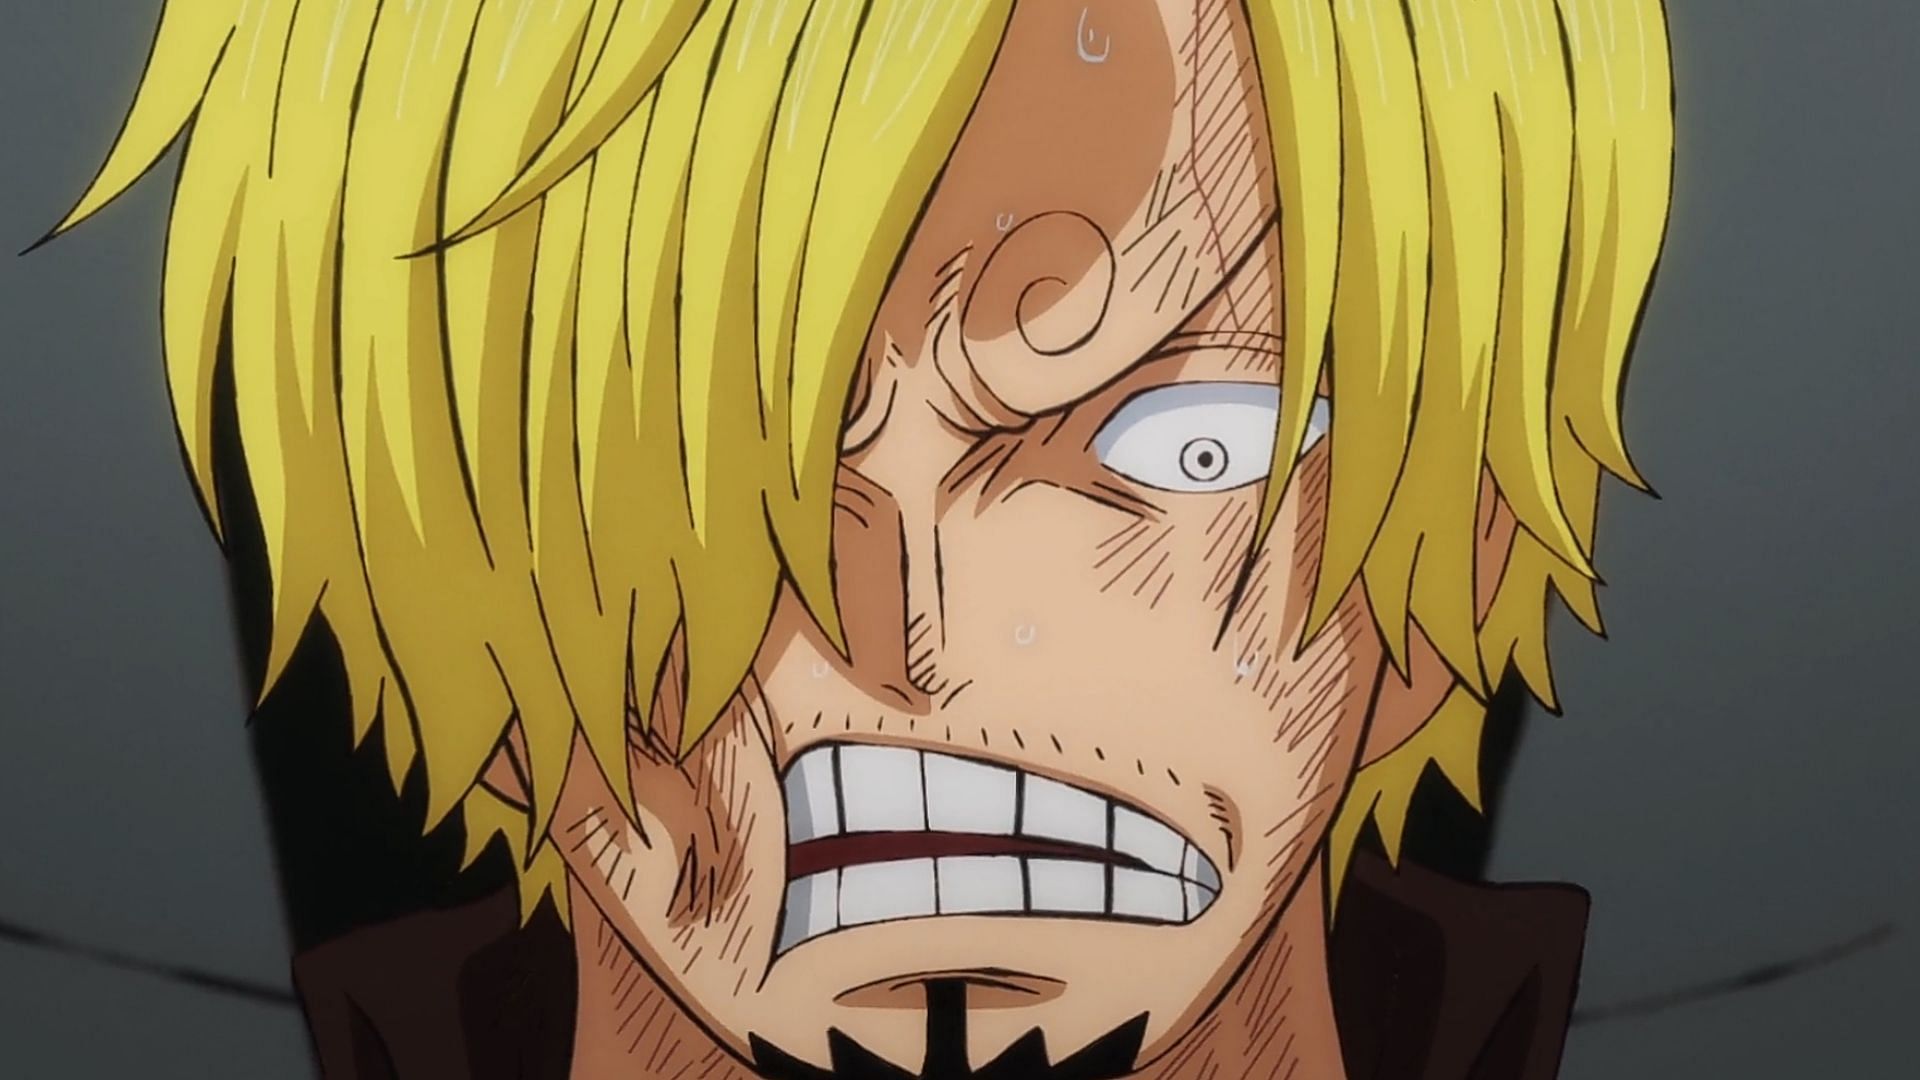 Sanji from One Piece episode 1053 (Image via Toei Animation)